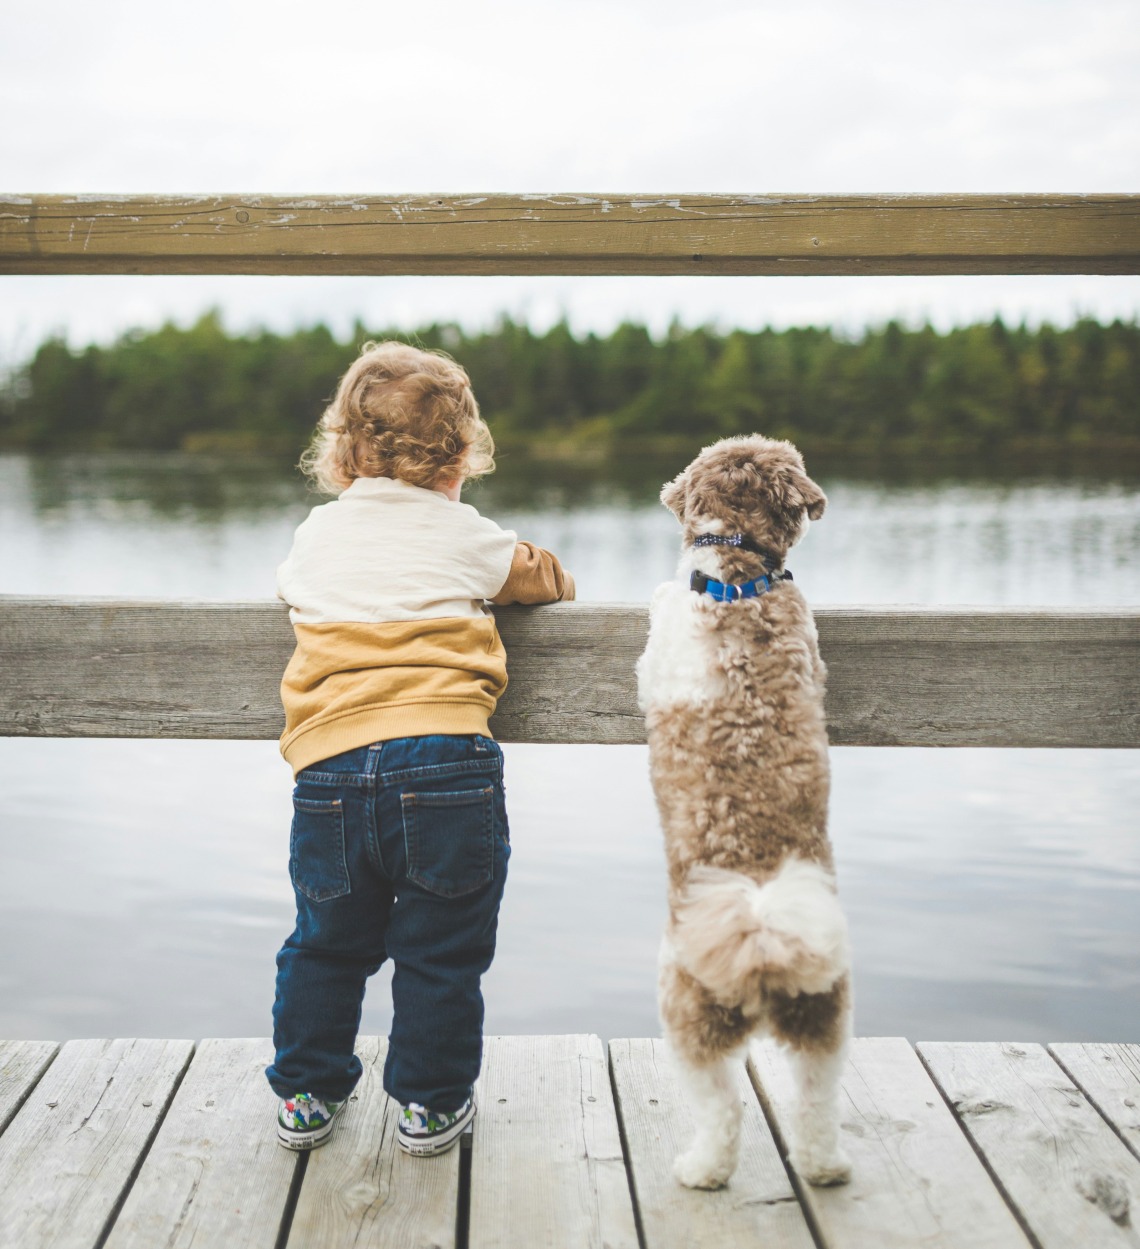 A child and dog stand on a dock and look out at the water.